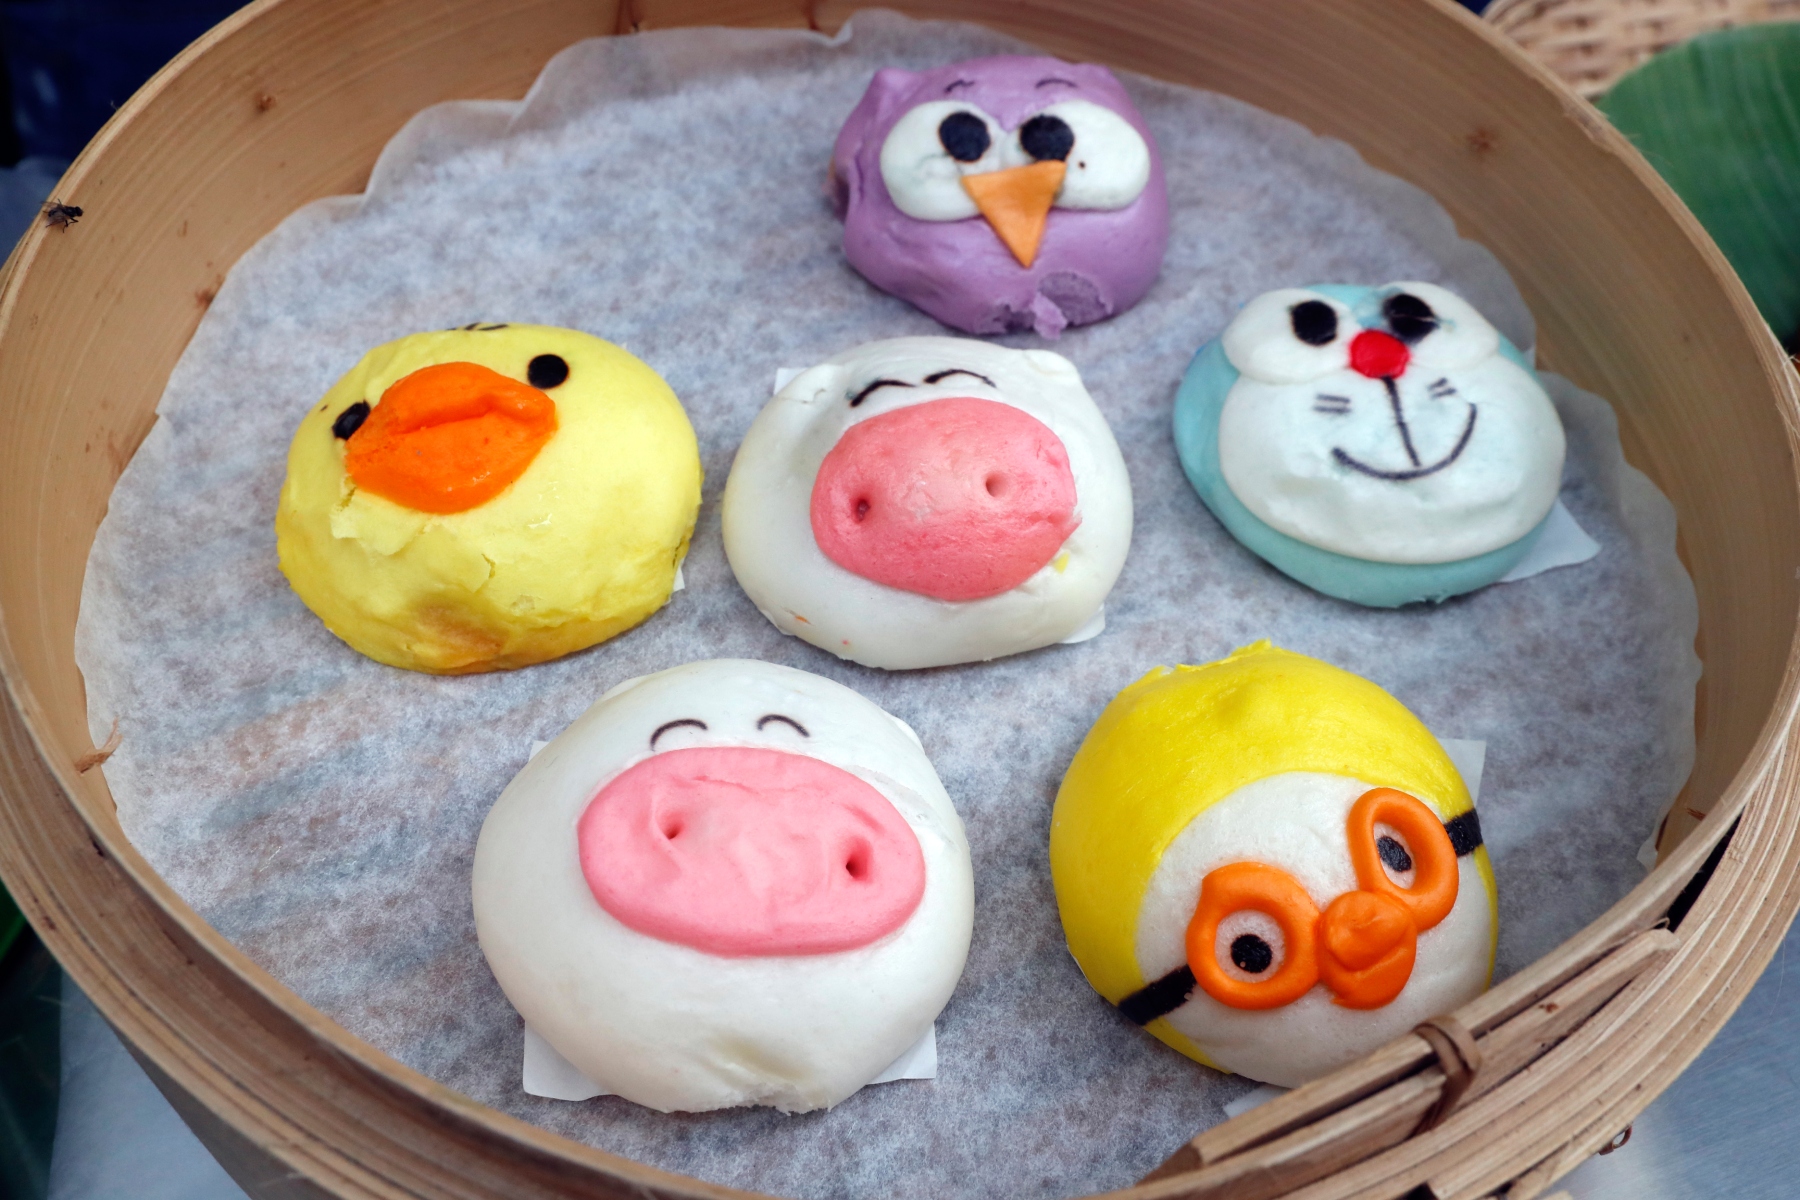 Steamed buns decorated as popular cartoons in Singapore's Chinatown